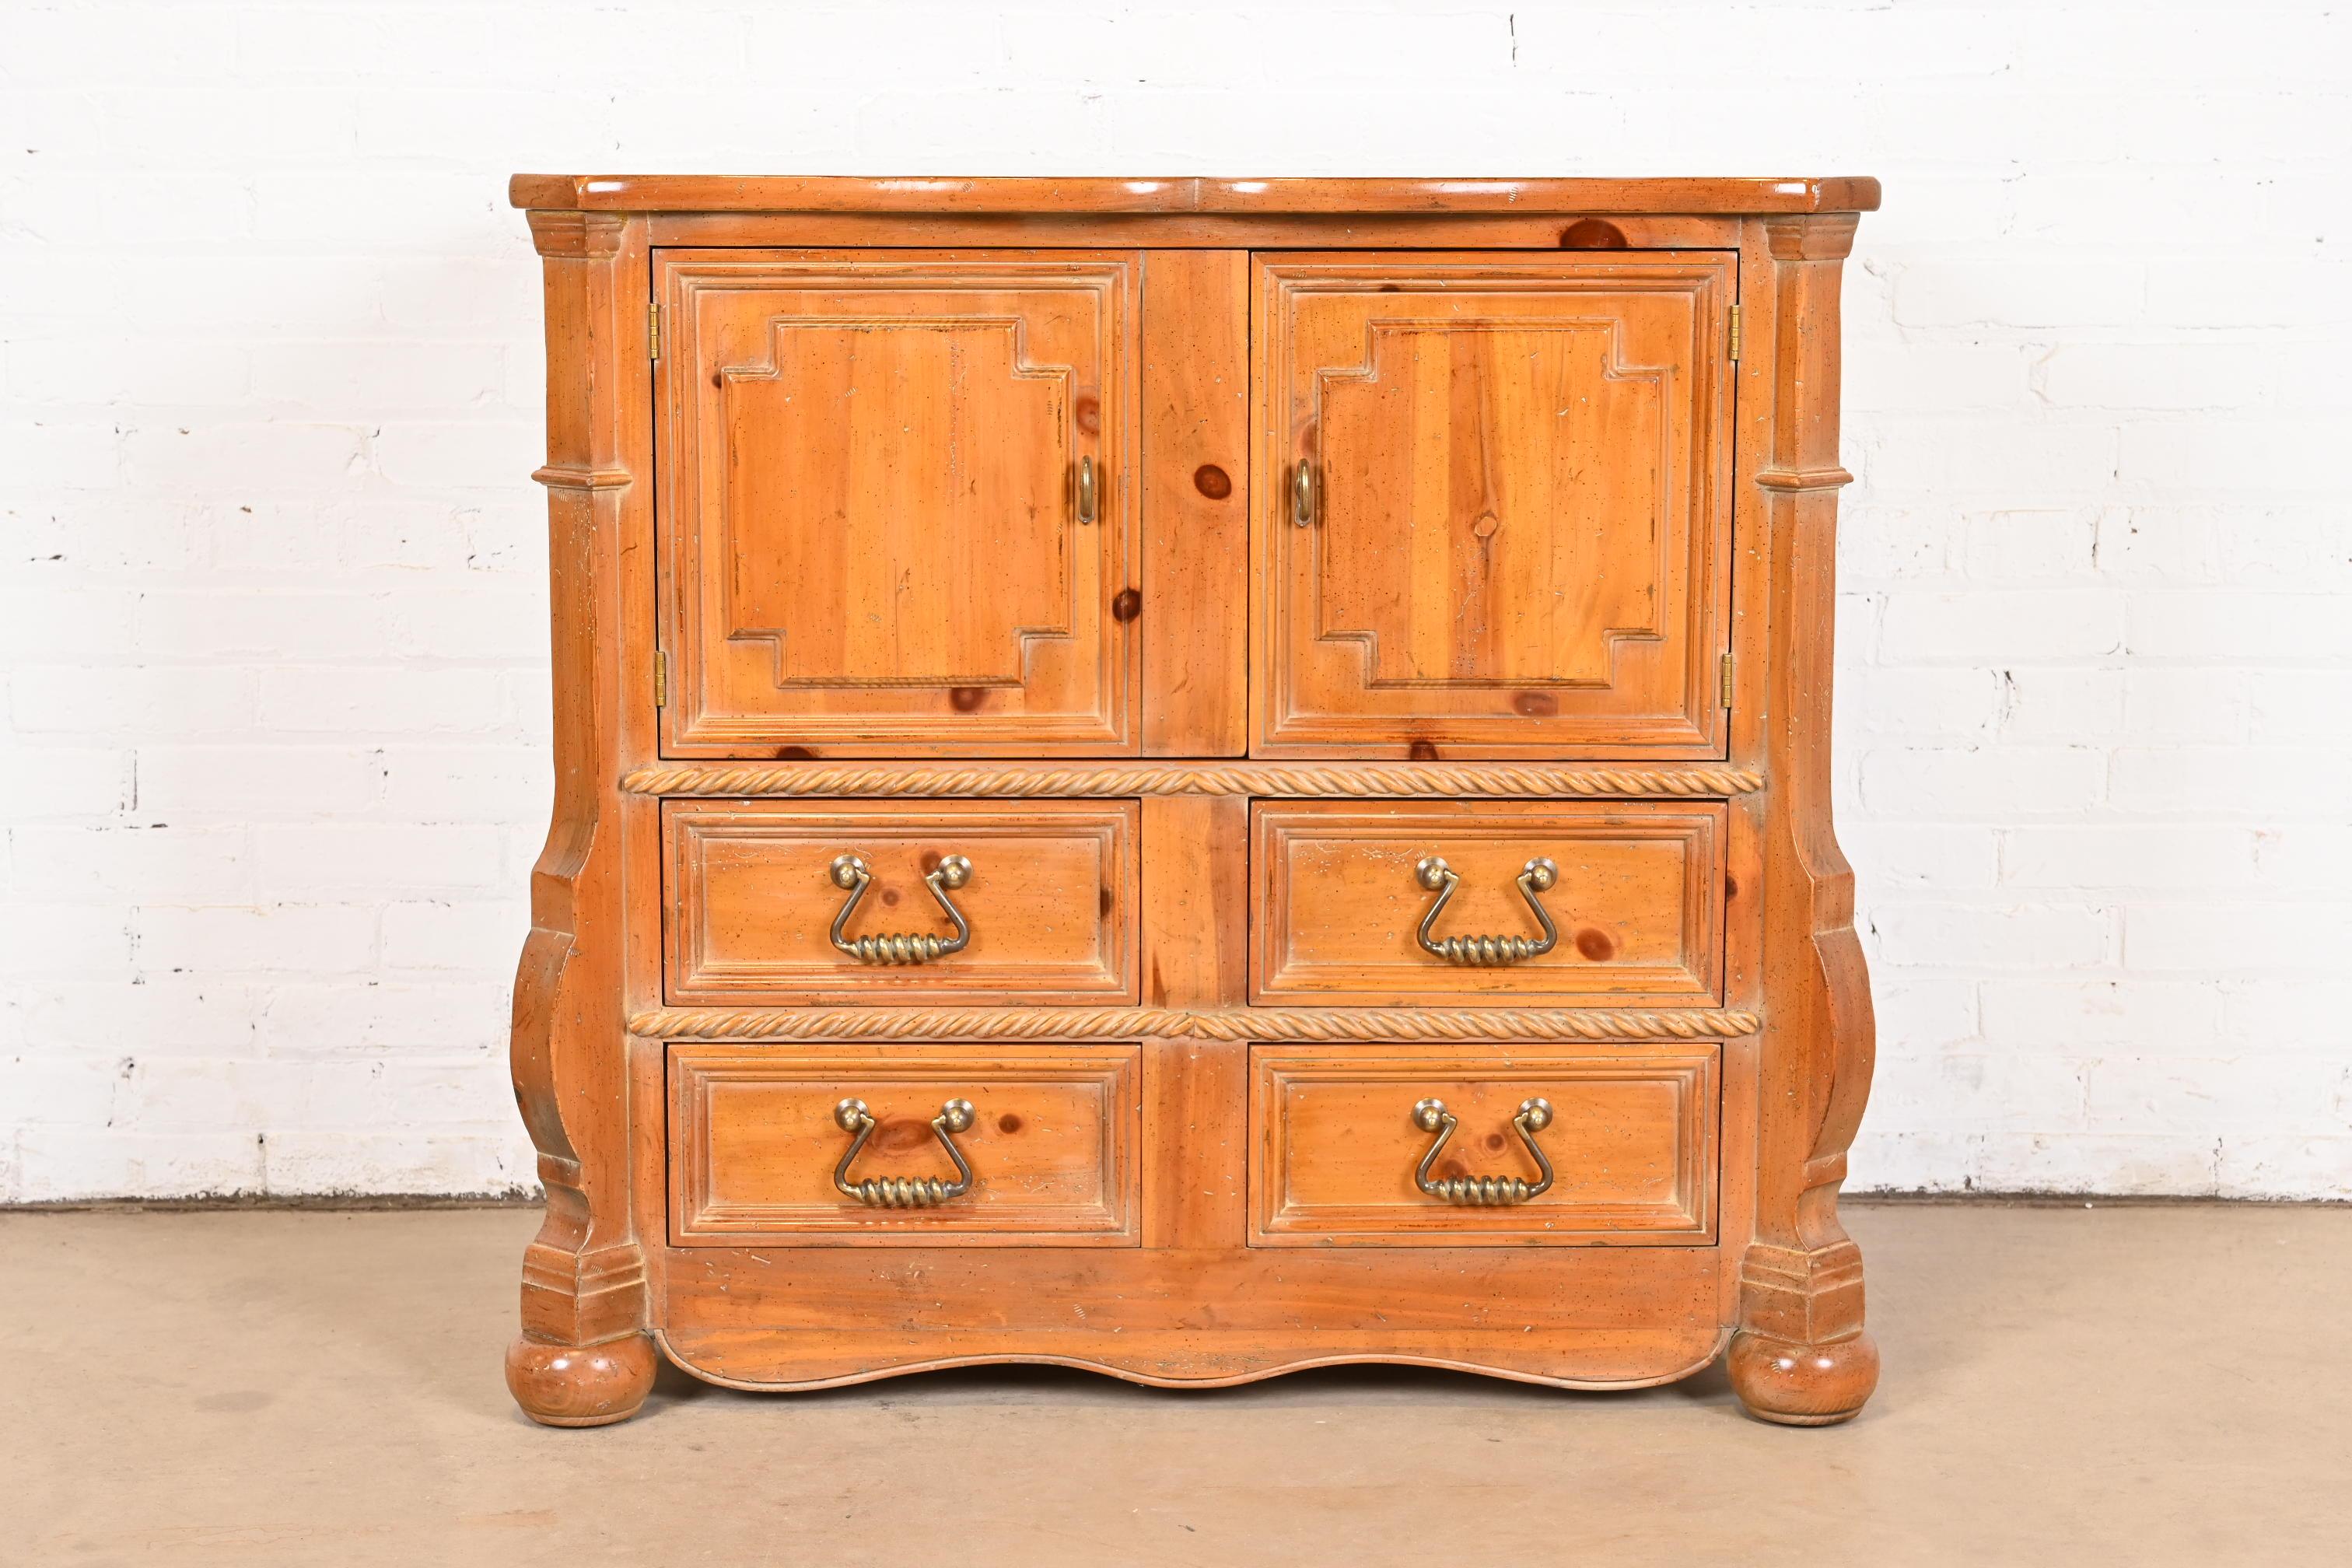 Spanish Colonial Henredon Spanish Baroque Carved Solid Pine Bar Cabinet or Chest of Drawers For Sale